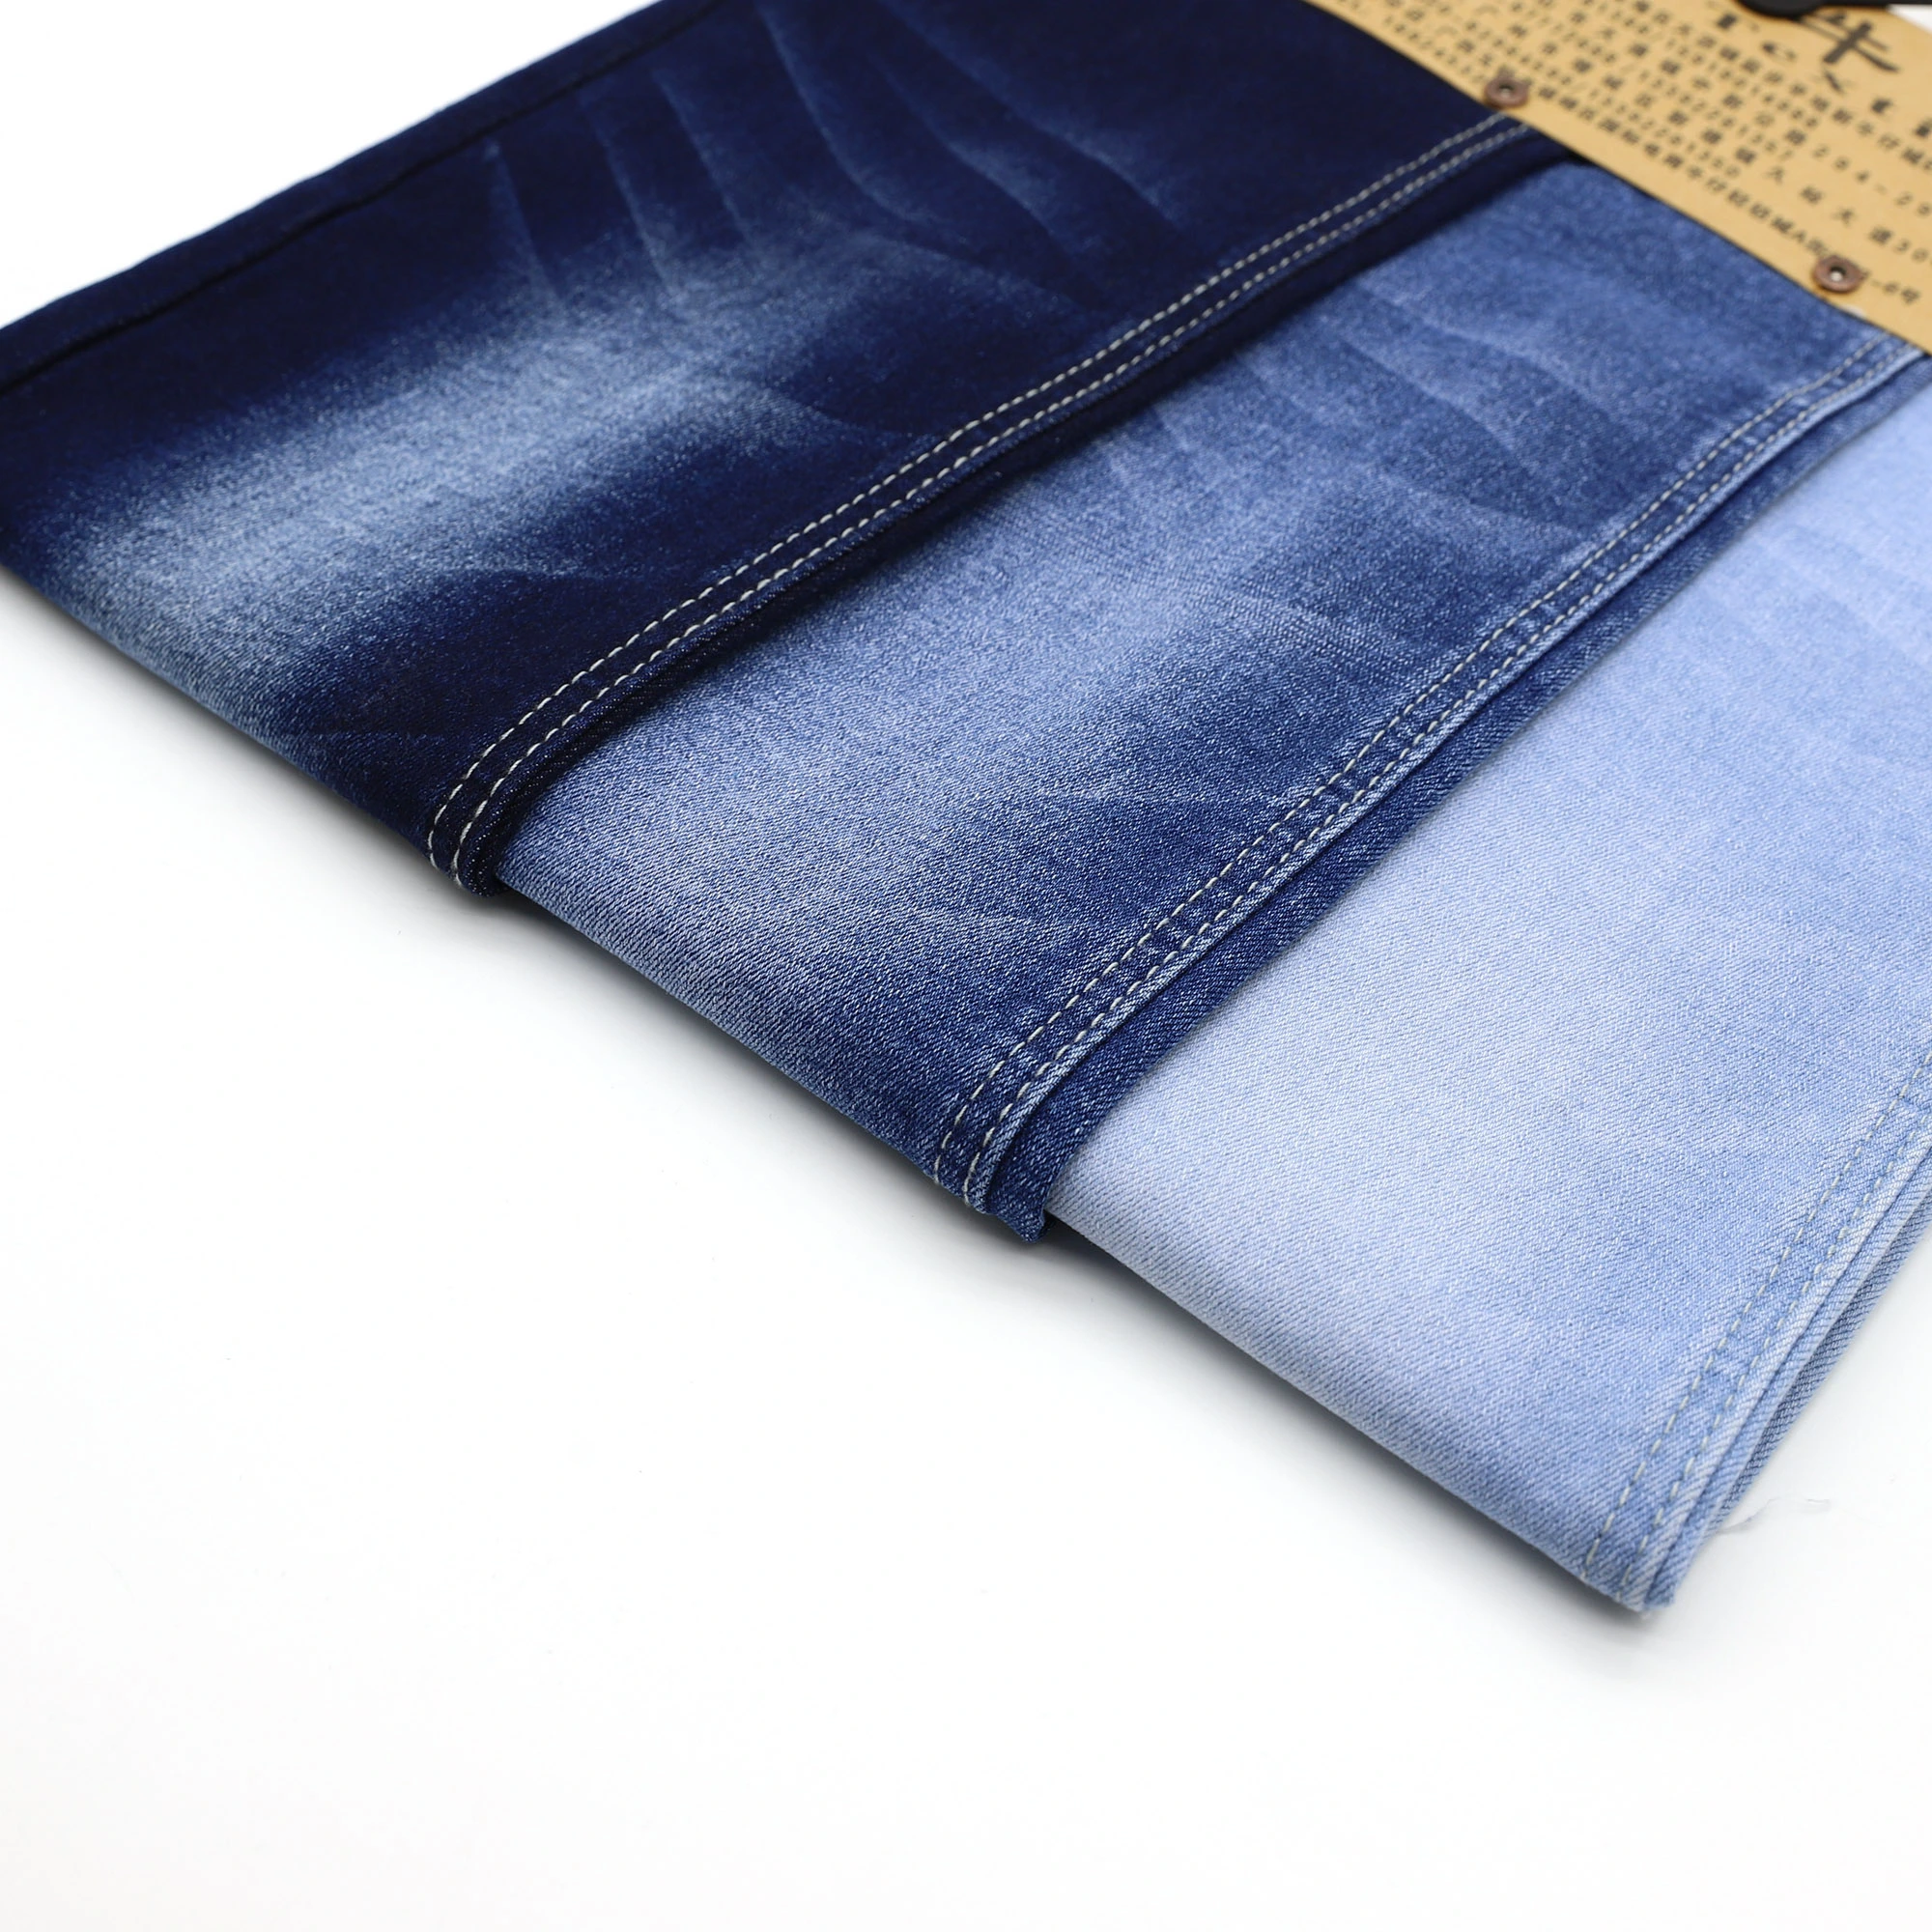 205A-13 super stretch denim fabric with 64%cotton  30.5S%poly  3.5%spandex   1%other 8